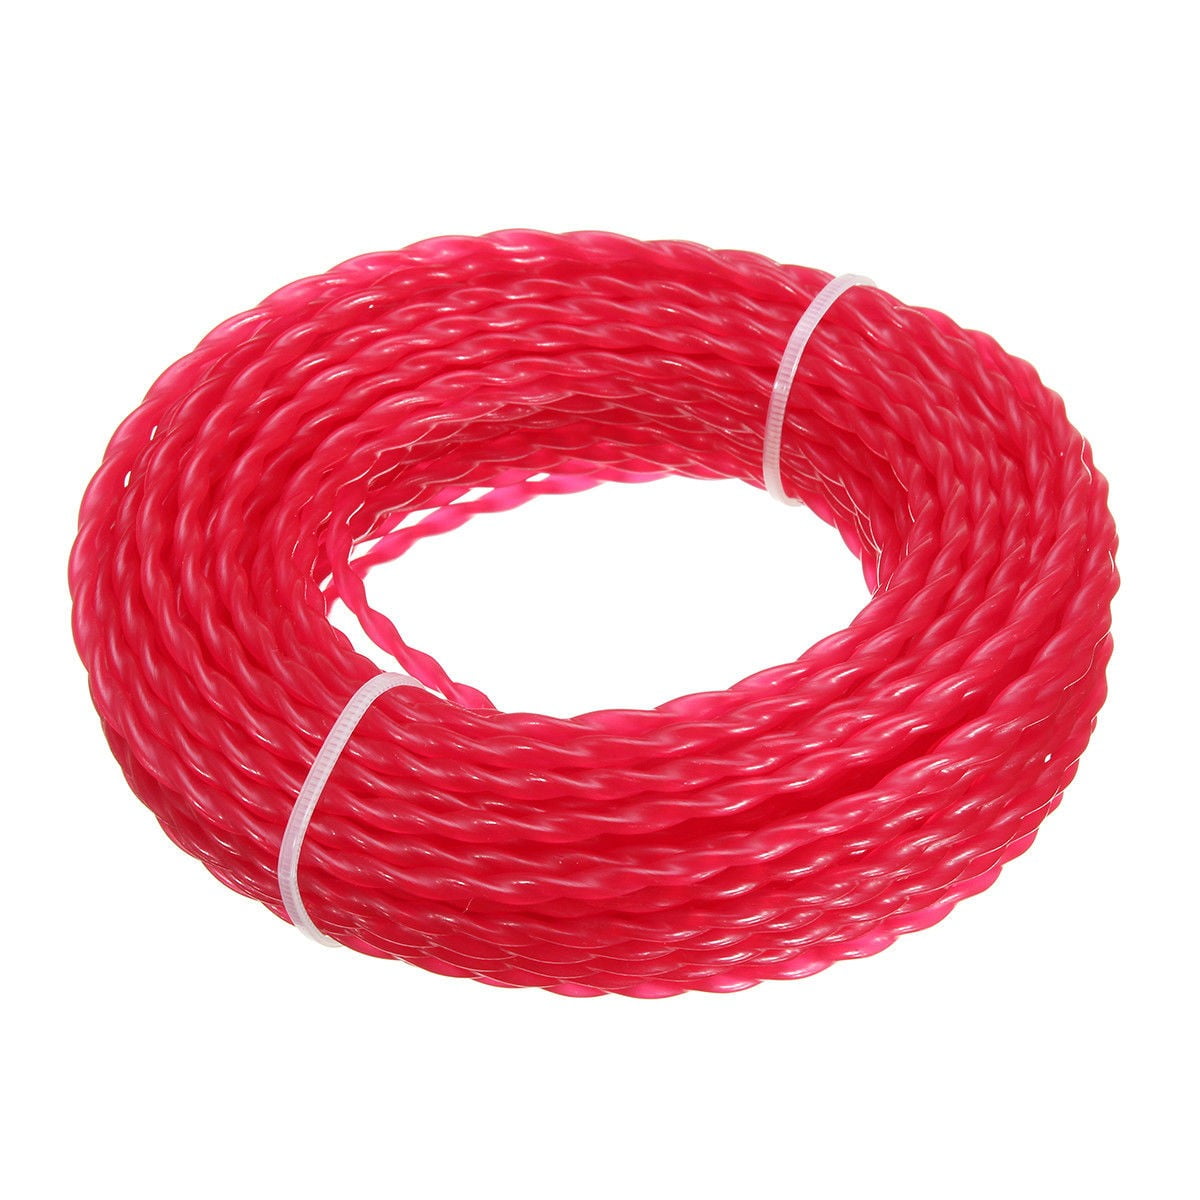 3mm x 15m Red Garden Trimmer Line Electric Strimmers Grass Lawn Weeds Heavy Duty 